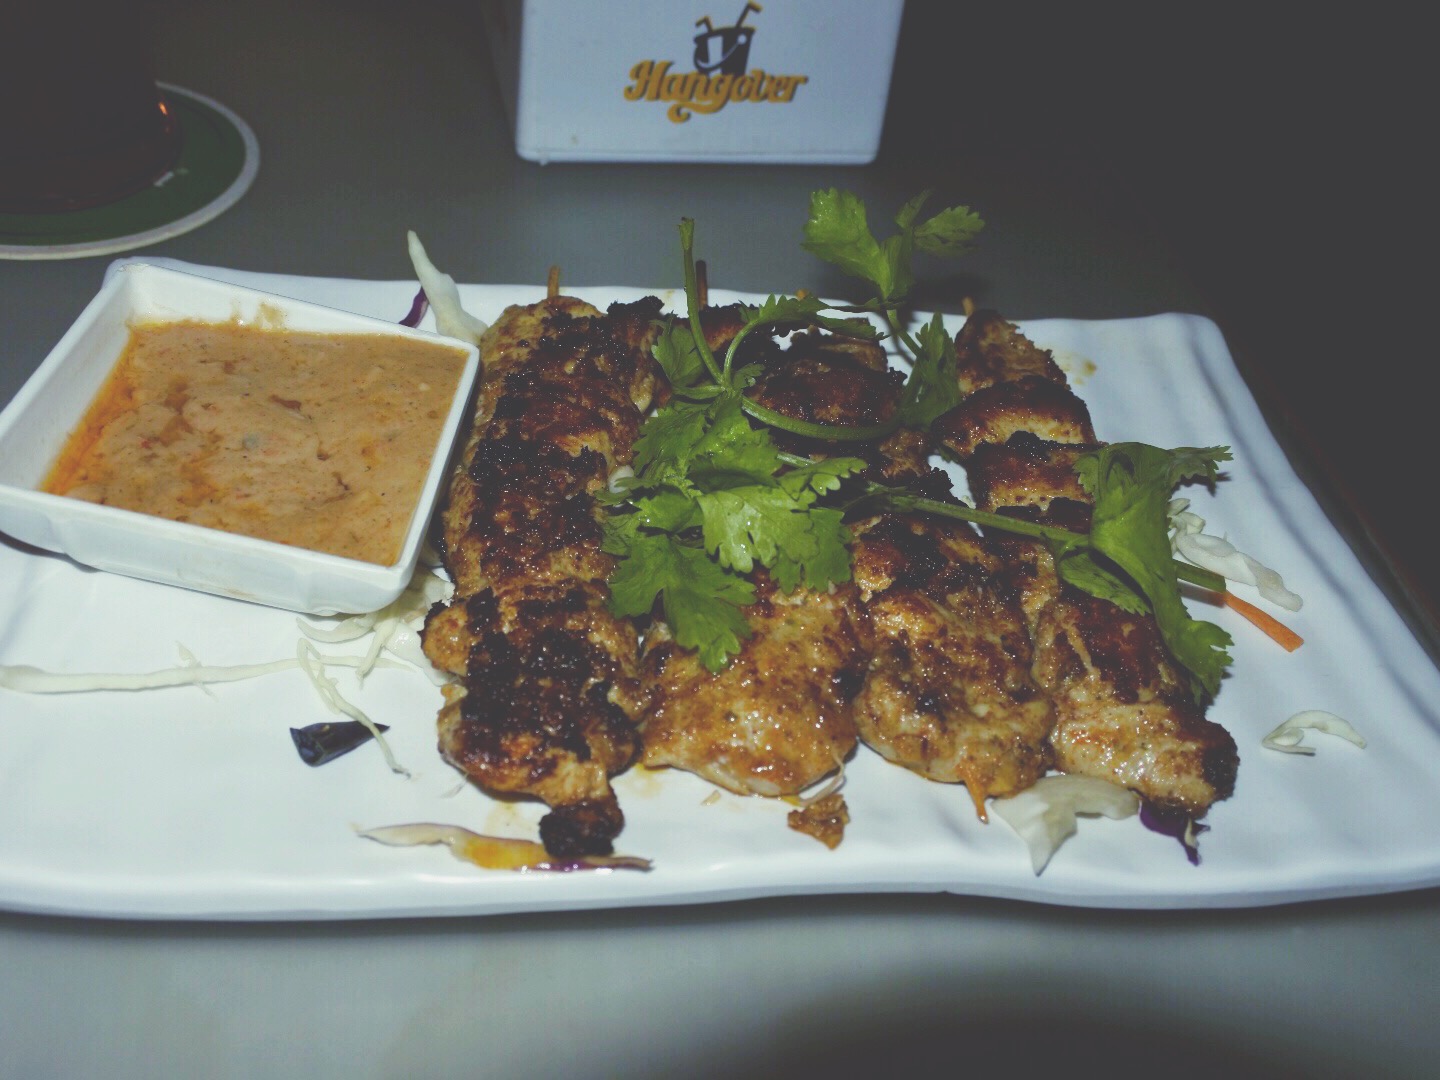 K loved the delicious chicken satay